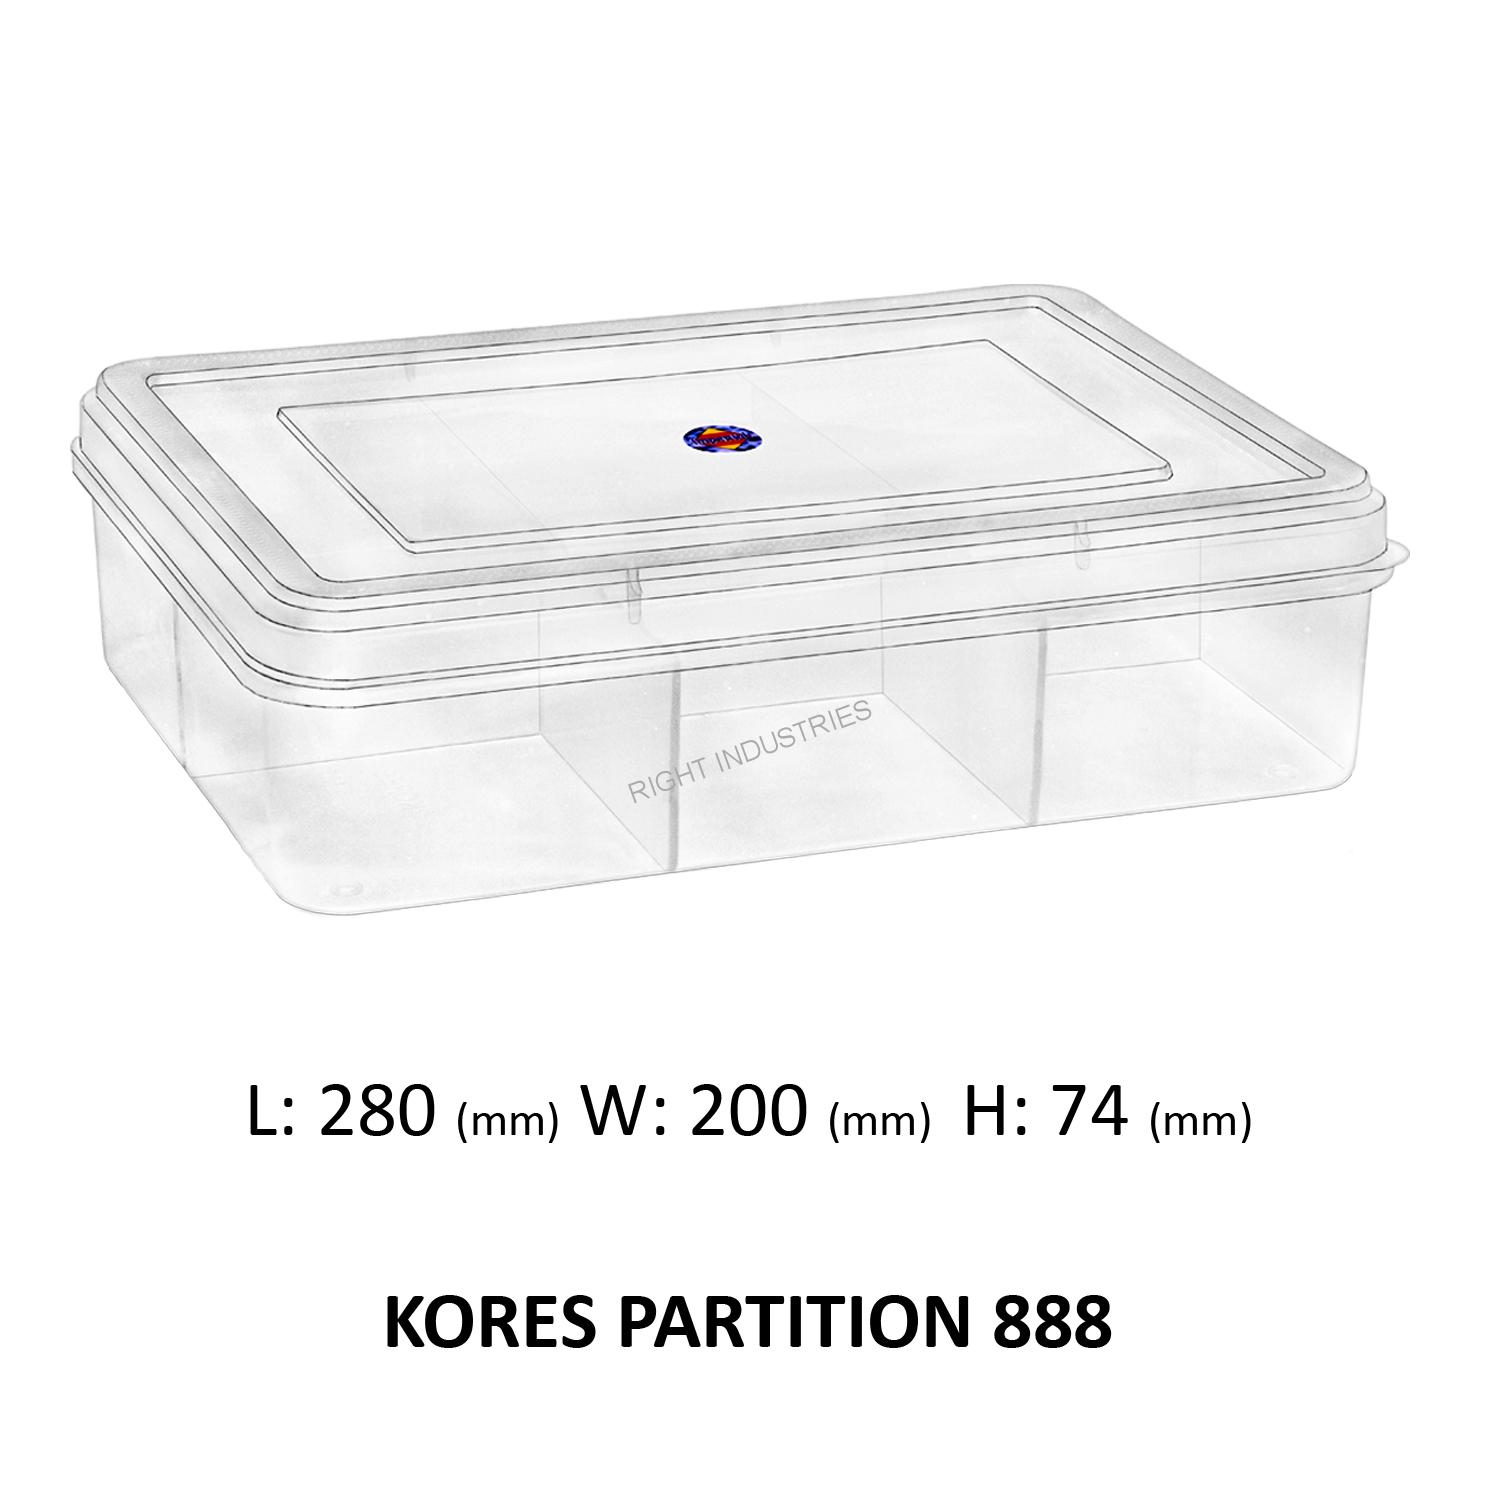 KORES PARTITION 888 – Right Industries